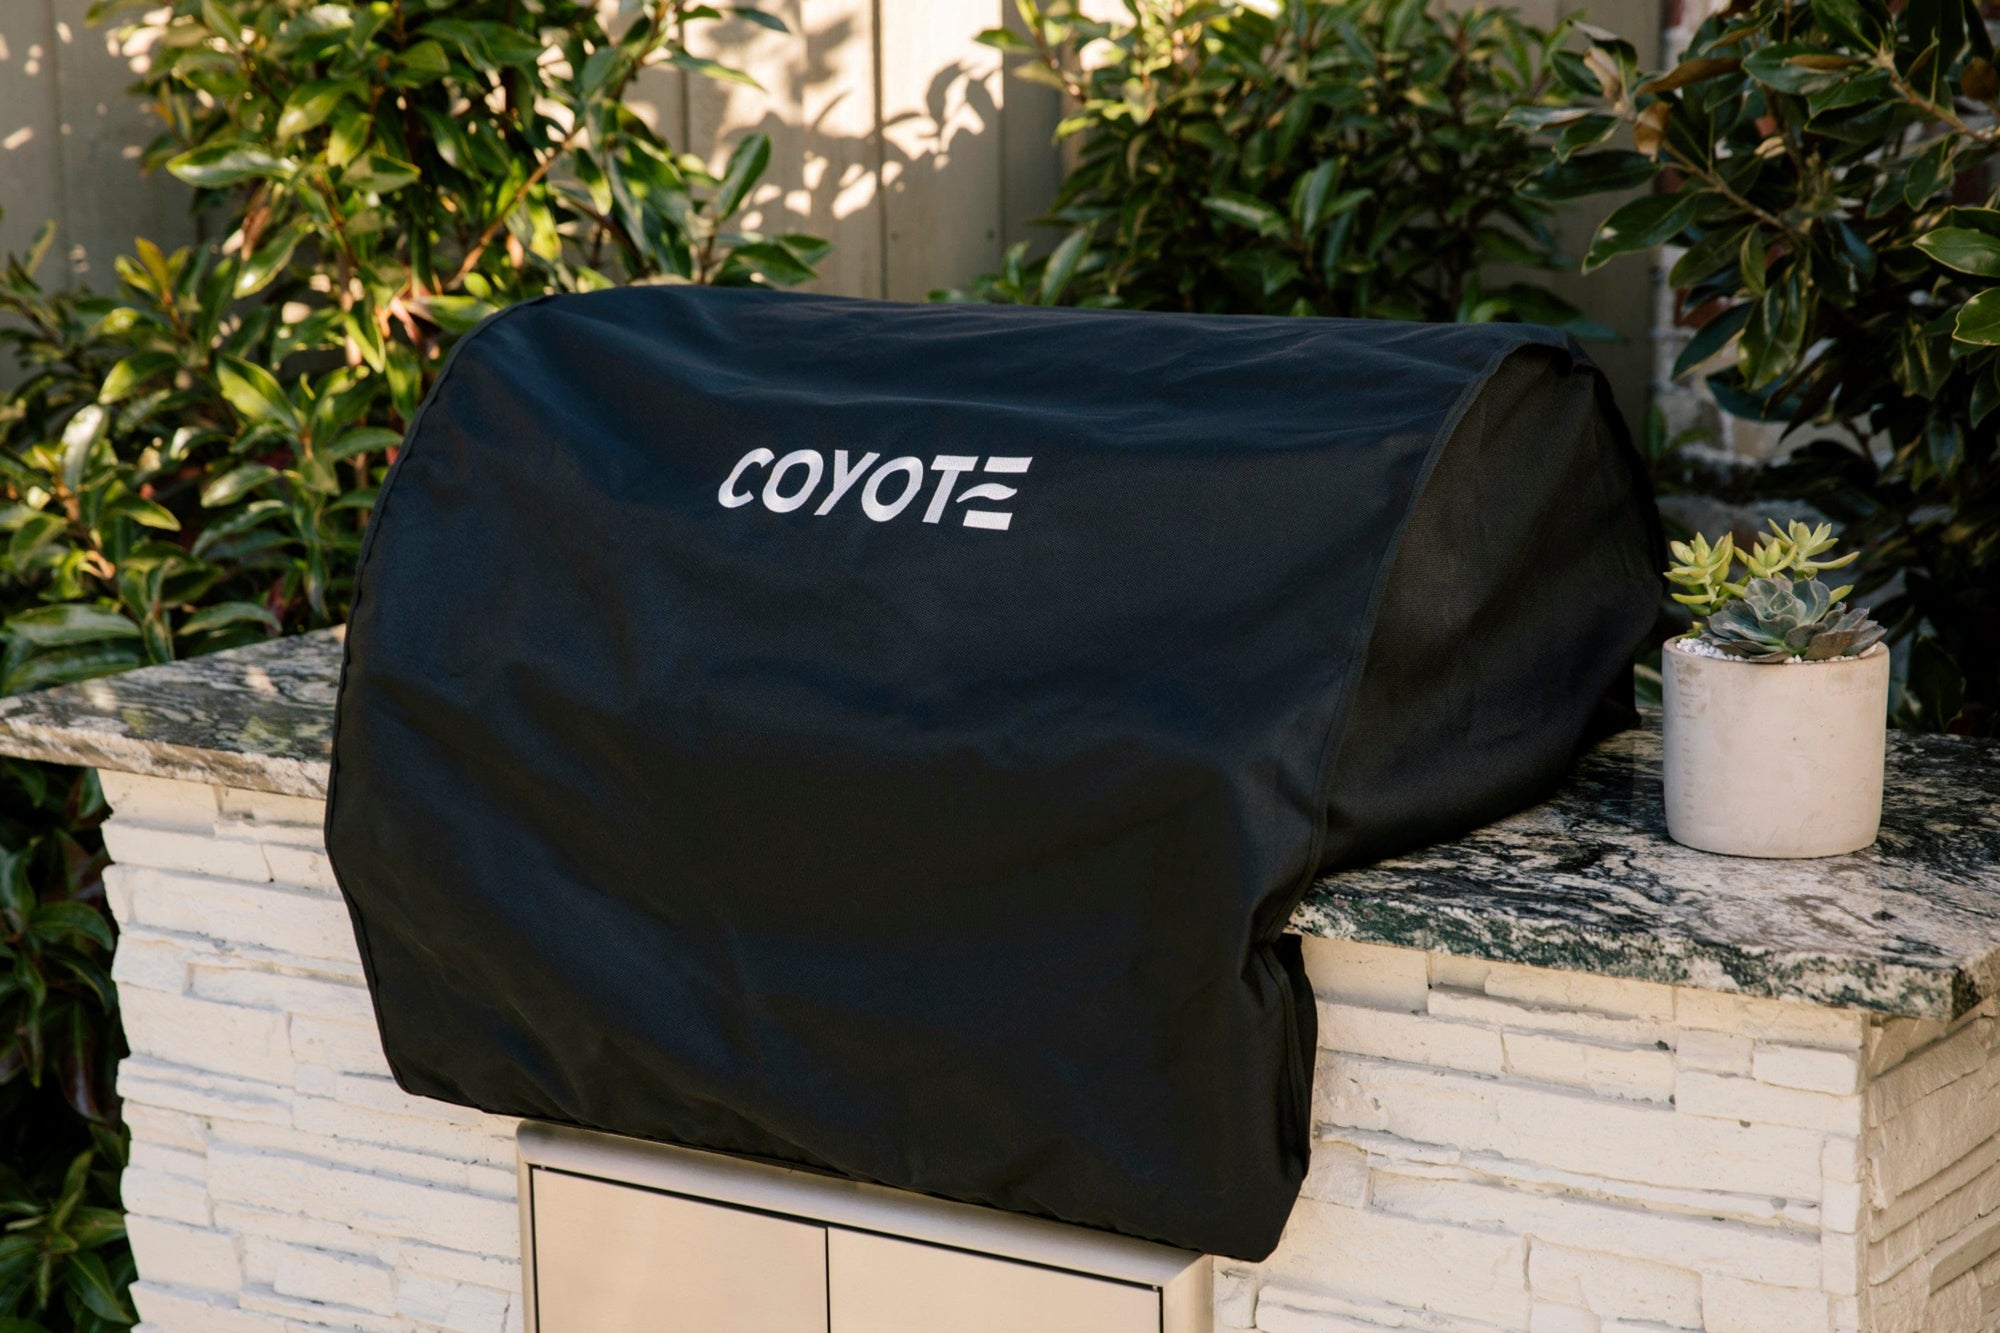 Coyote Grill Cover for 36" Built-In Pellet Grill Head Cover